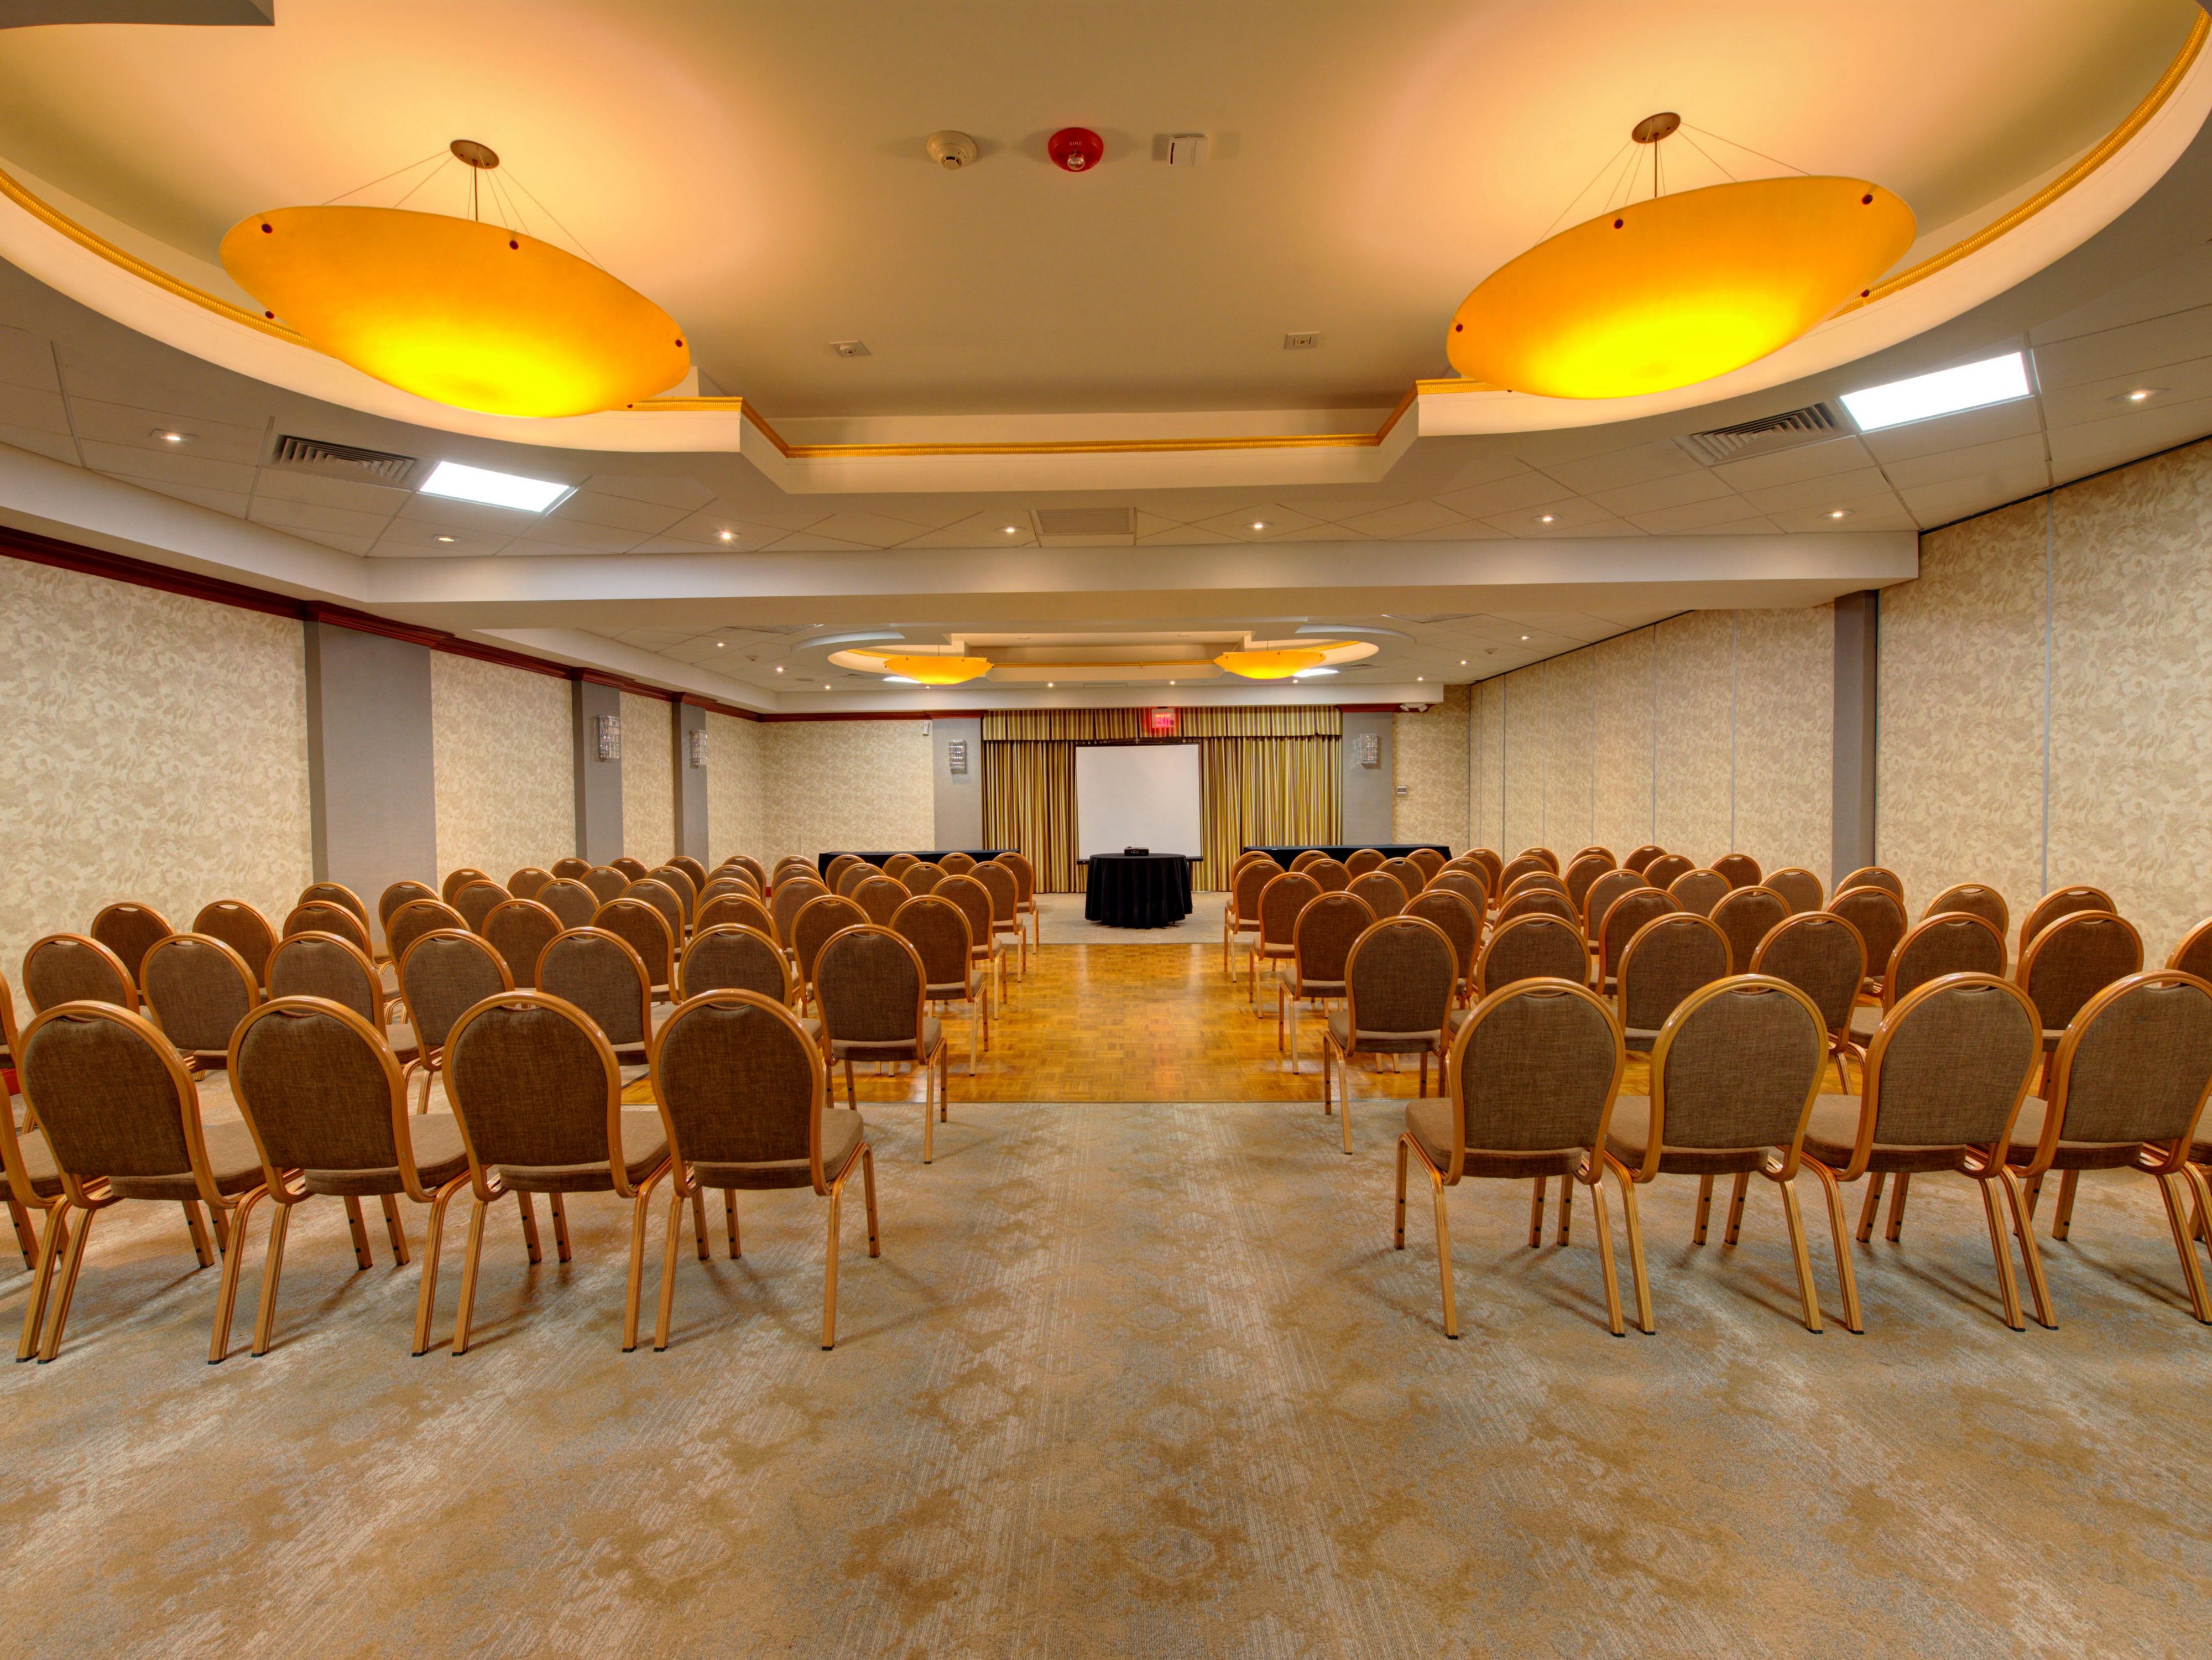 With seven flexible meeting rooms, free Wi-Fi, free parking, state-of-the-art A/V equipment, and customizable catering packages, the Holiday Inn Plainview - Long Island is the perfect setting for board meetings, conferences, trade shows, and formal dinners. Our experienced staff can assist with planning your event.